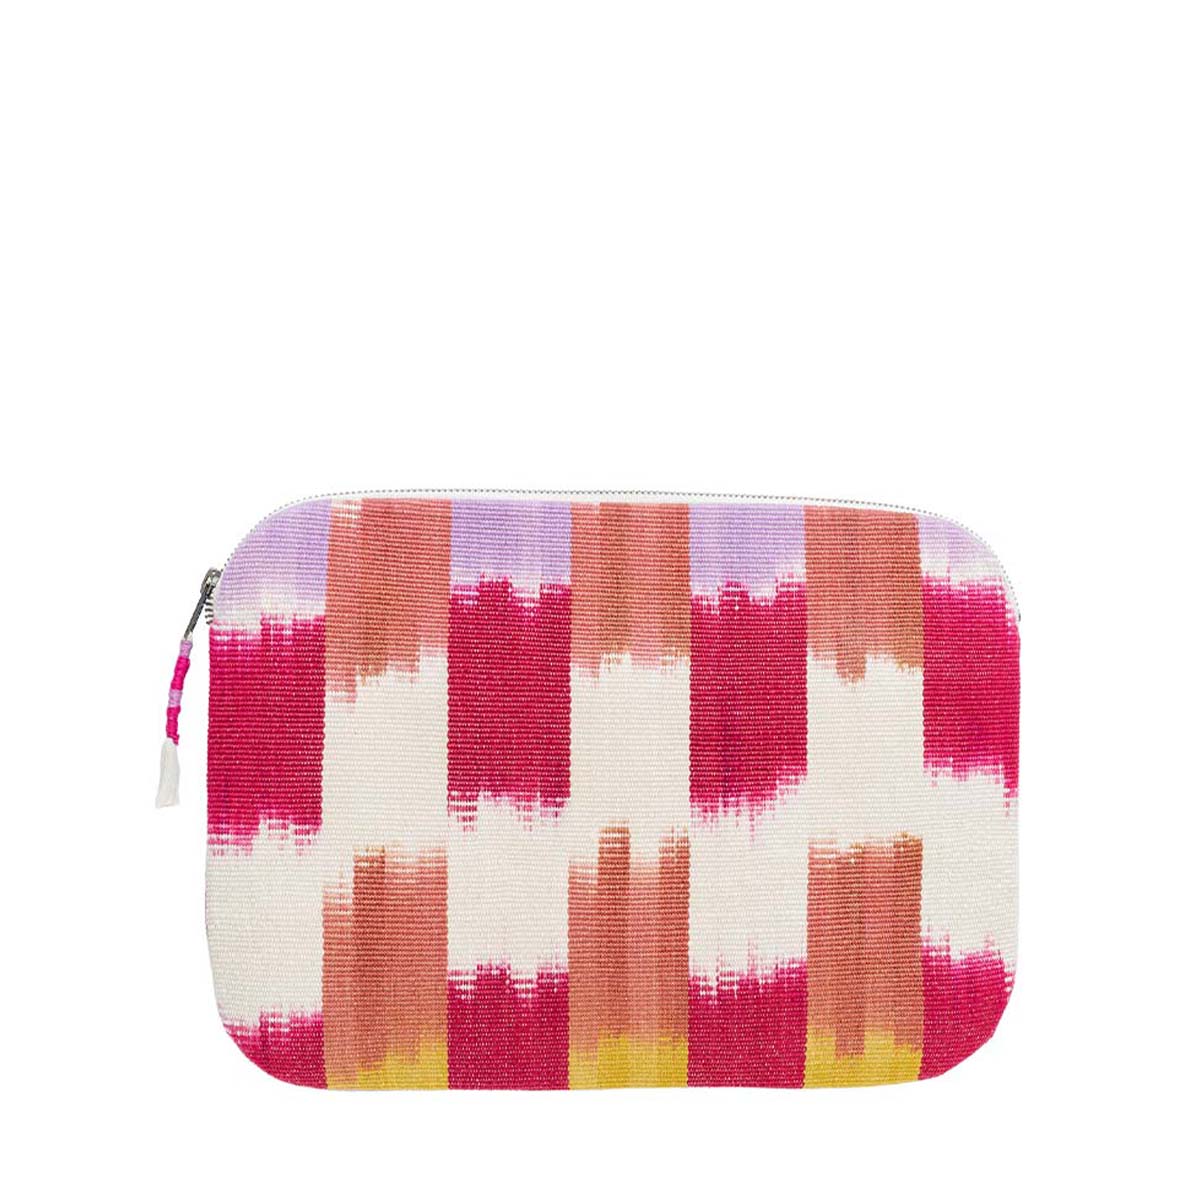 The Elenita Laptop Case in Raspberry Paleta. The front has a flame stitch red, purple, yellow, and orange pattern, and a mini woven tassel attached to the zipper.